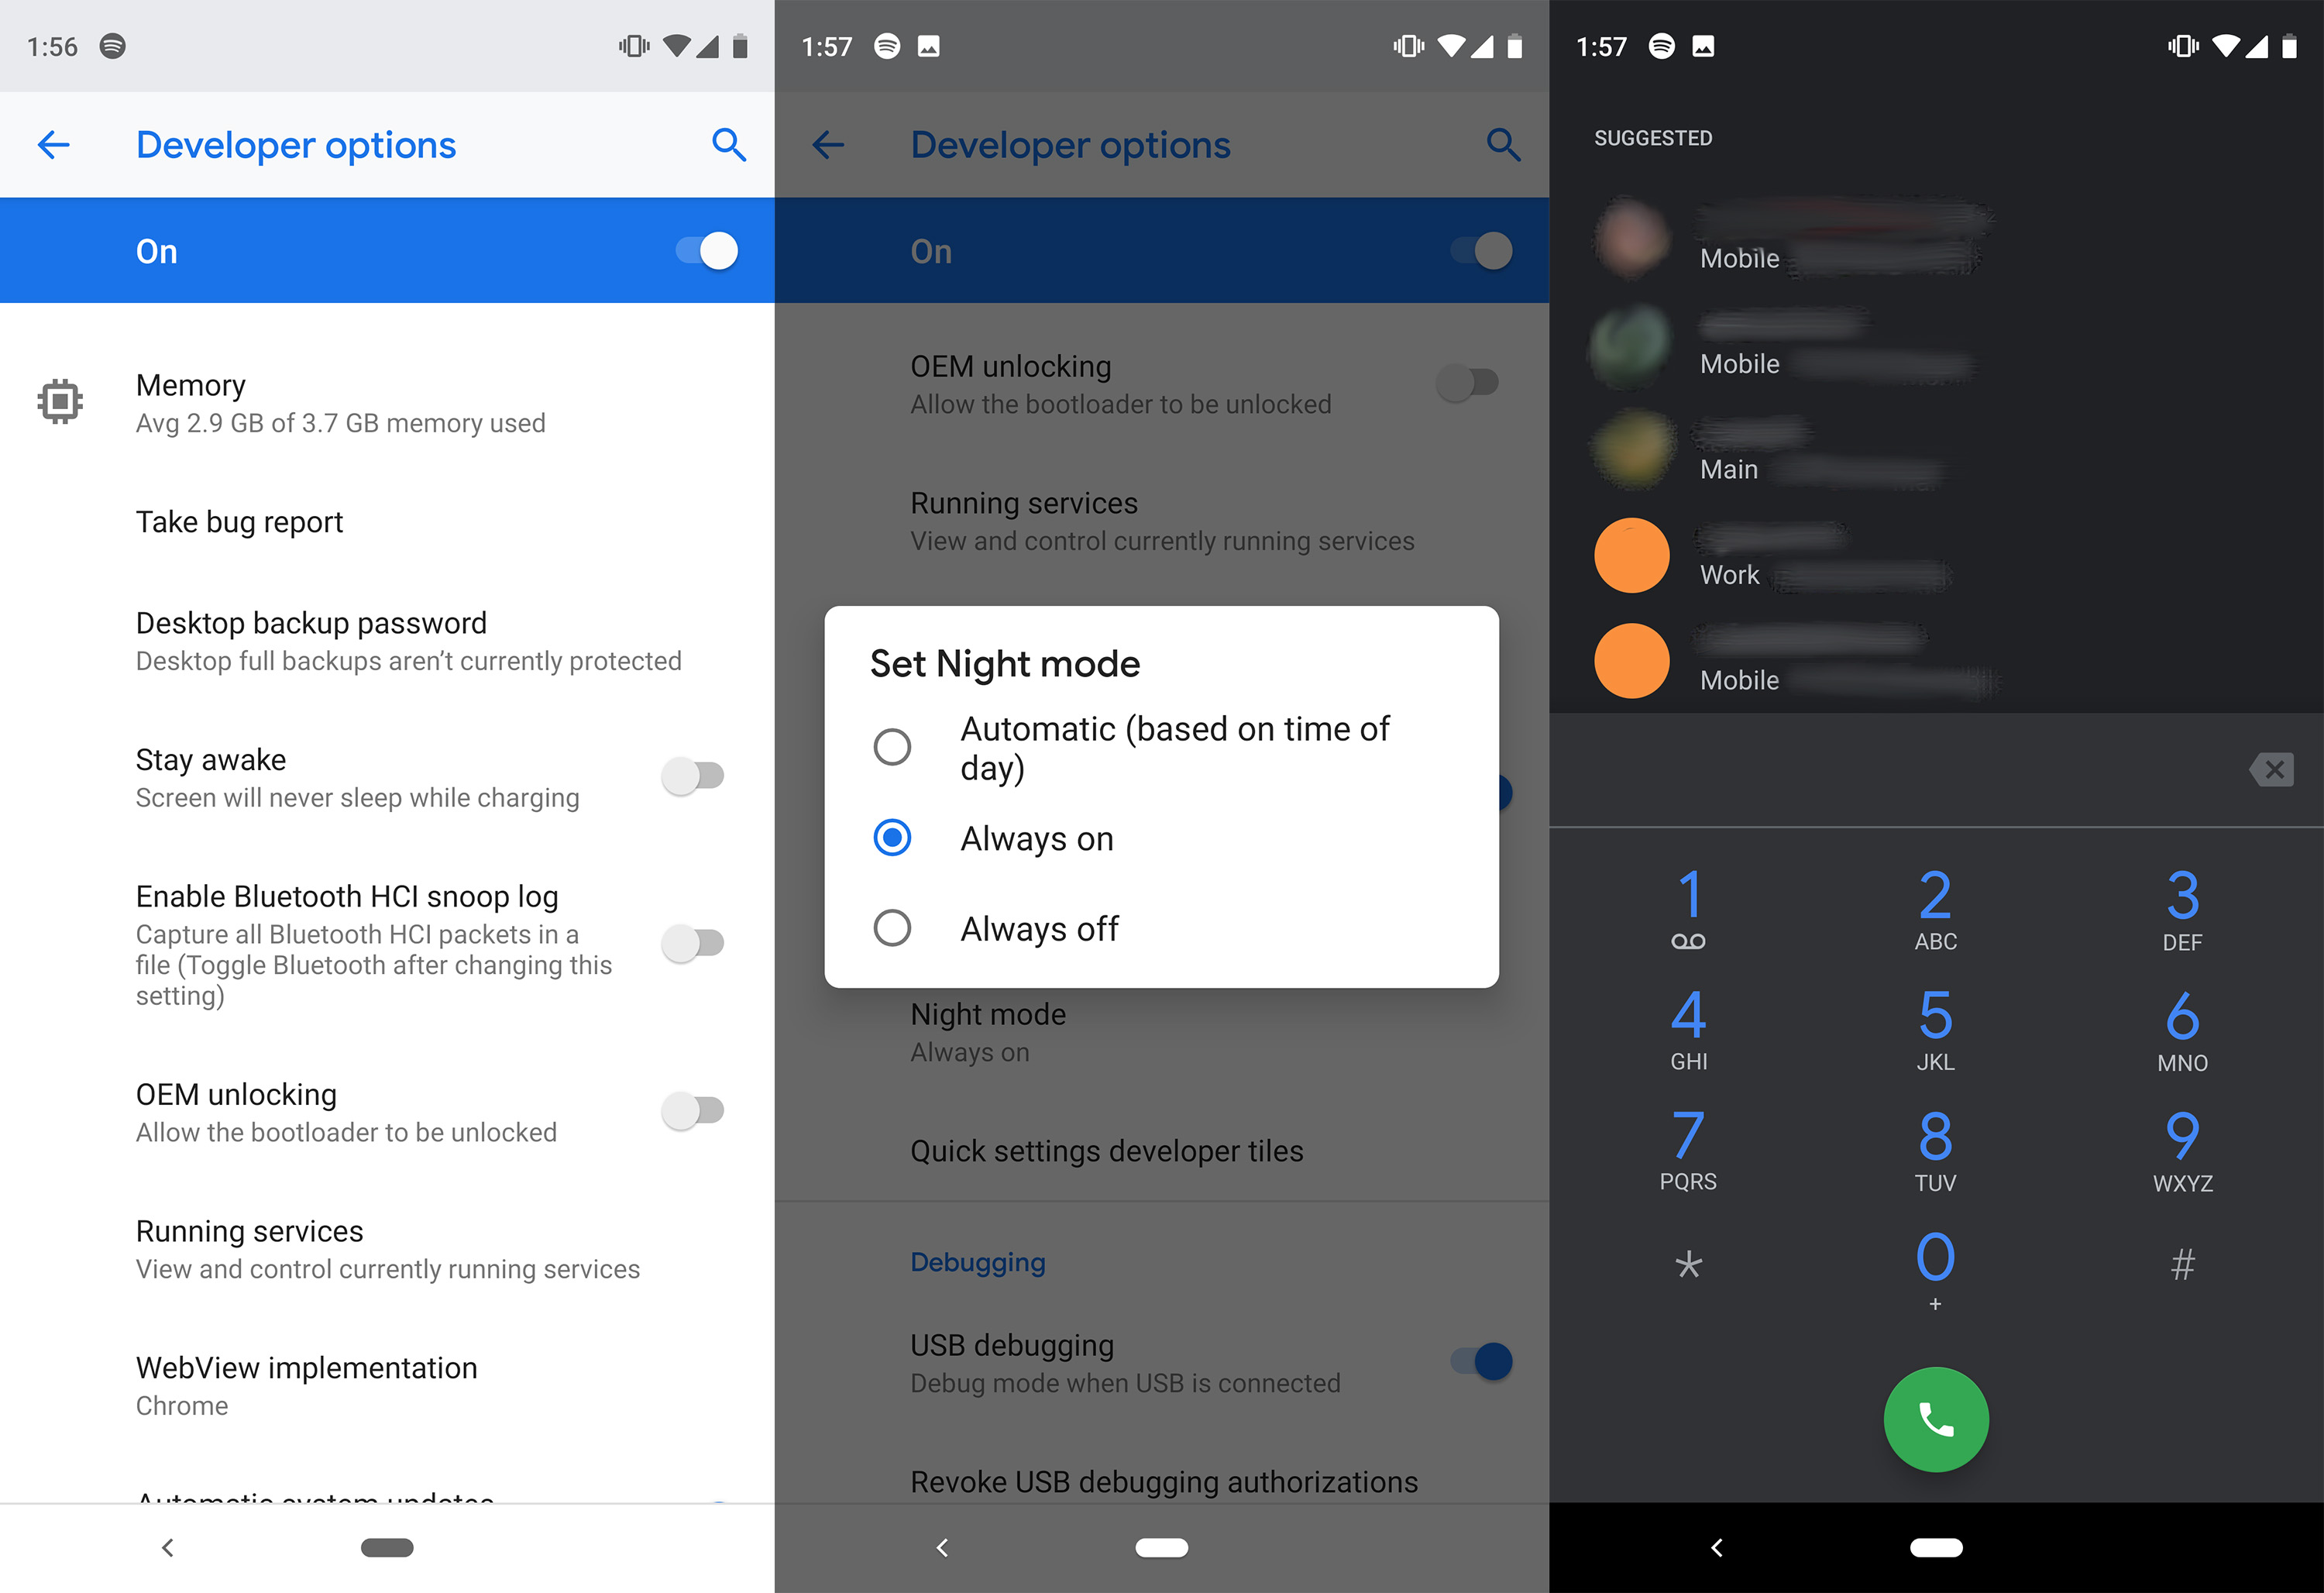 Will There Be A Darkish Theme For The Gmail App On Android 9